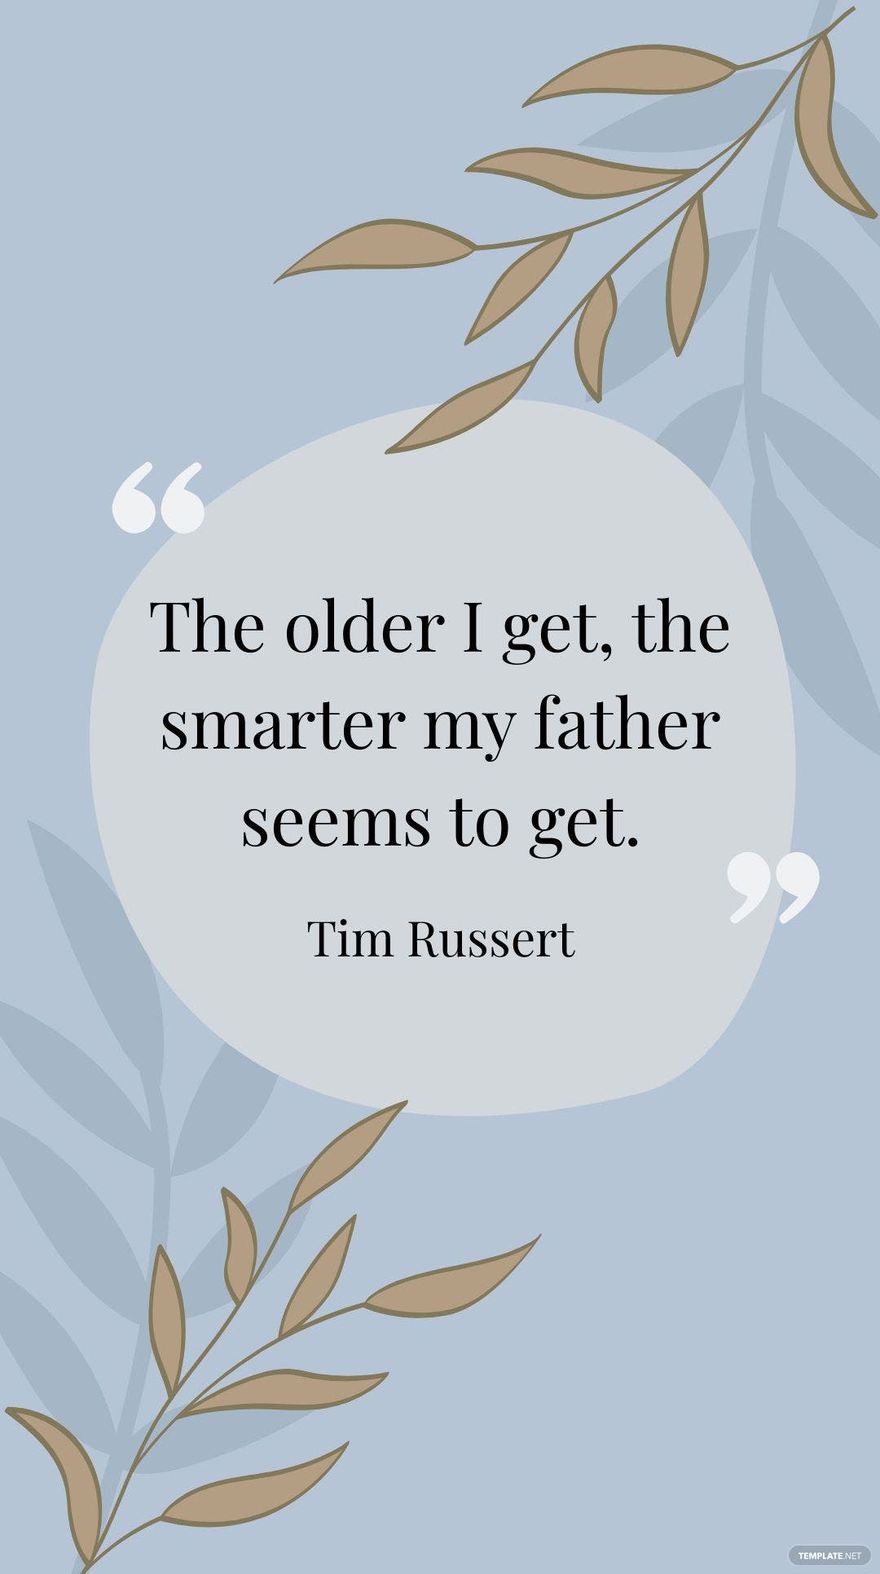 Free Tim Russert - “The older I get, the smarter my father seems to get.” in JPG